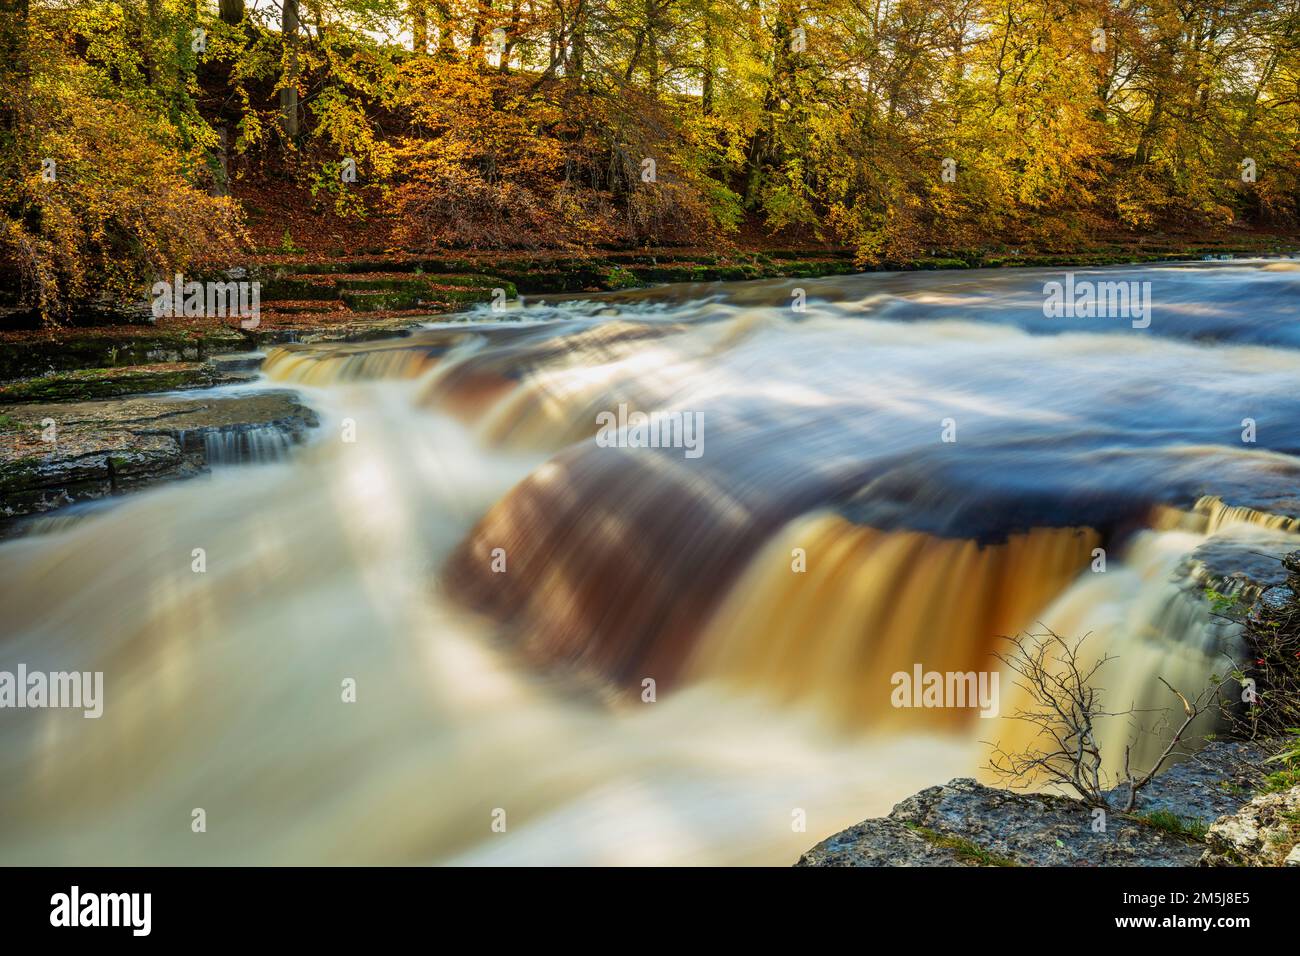 Yorkshire Dales National Park Lower Aysgarth Falls on the River ure mit Herbstfarben Wensleydale Yorkshire Dales North Yorkshire England UK GB Stockfoto